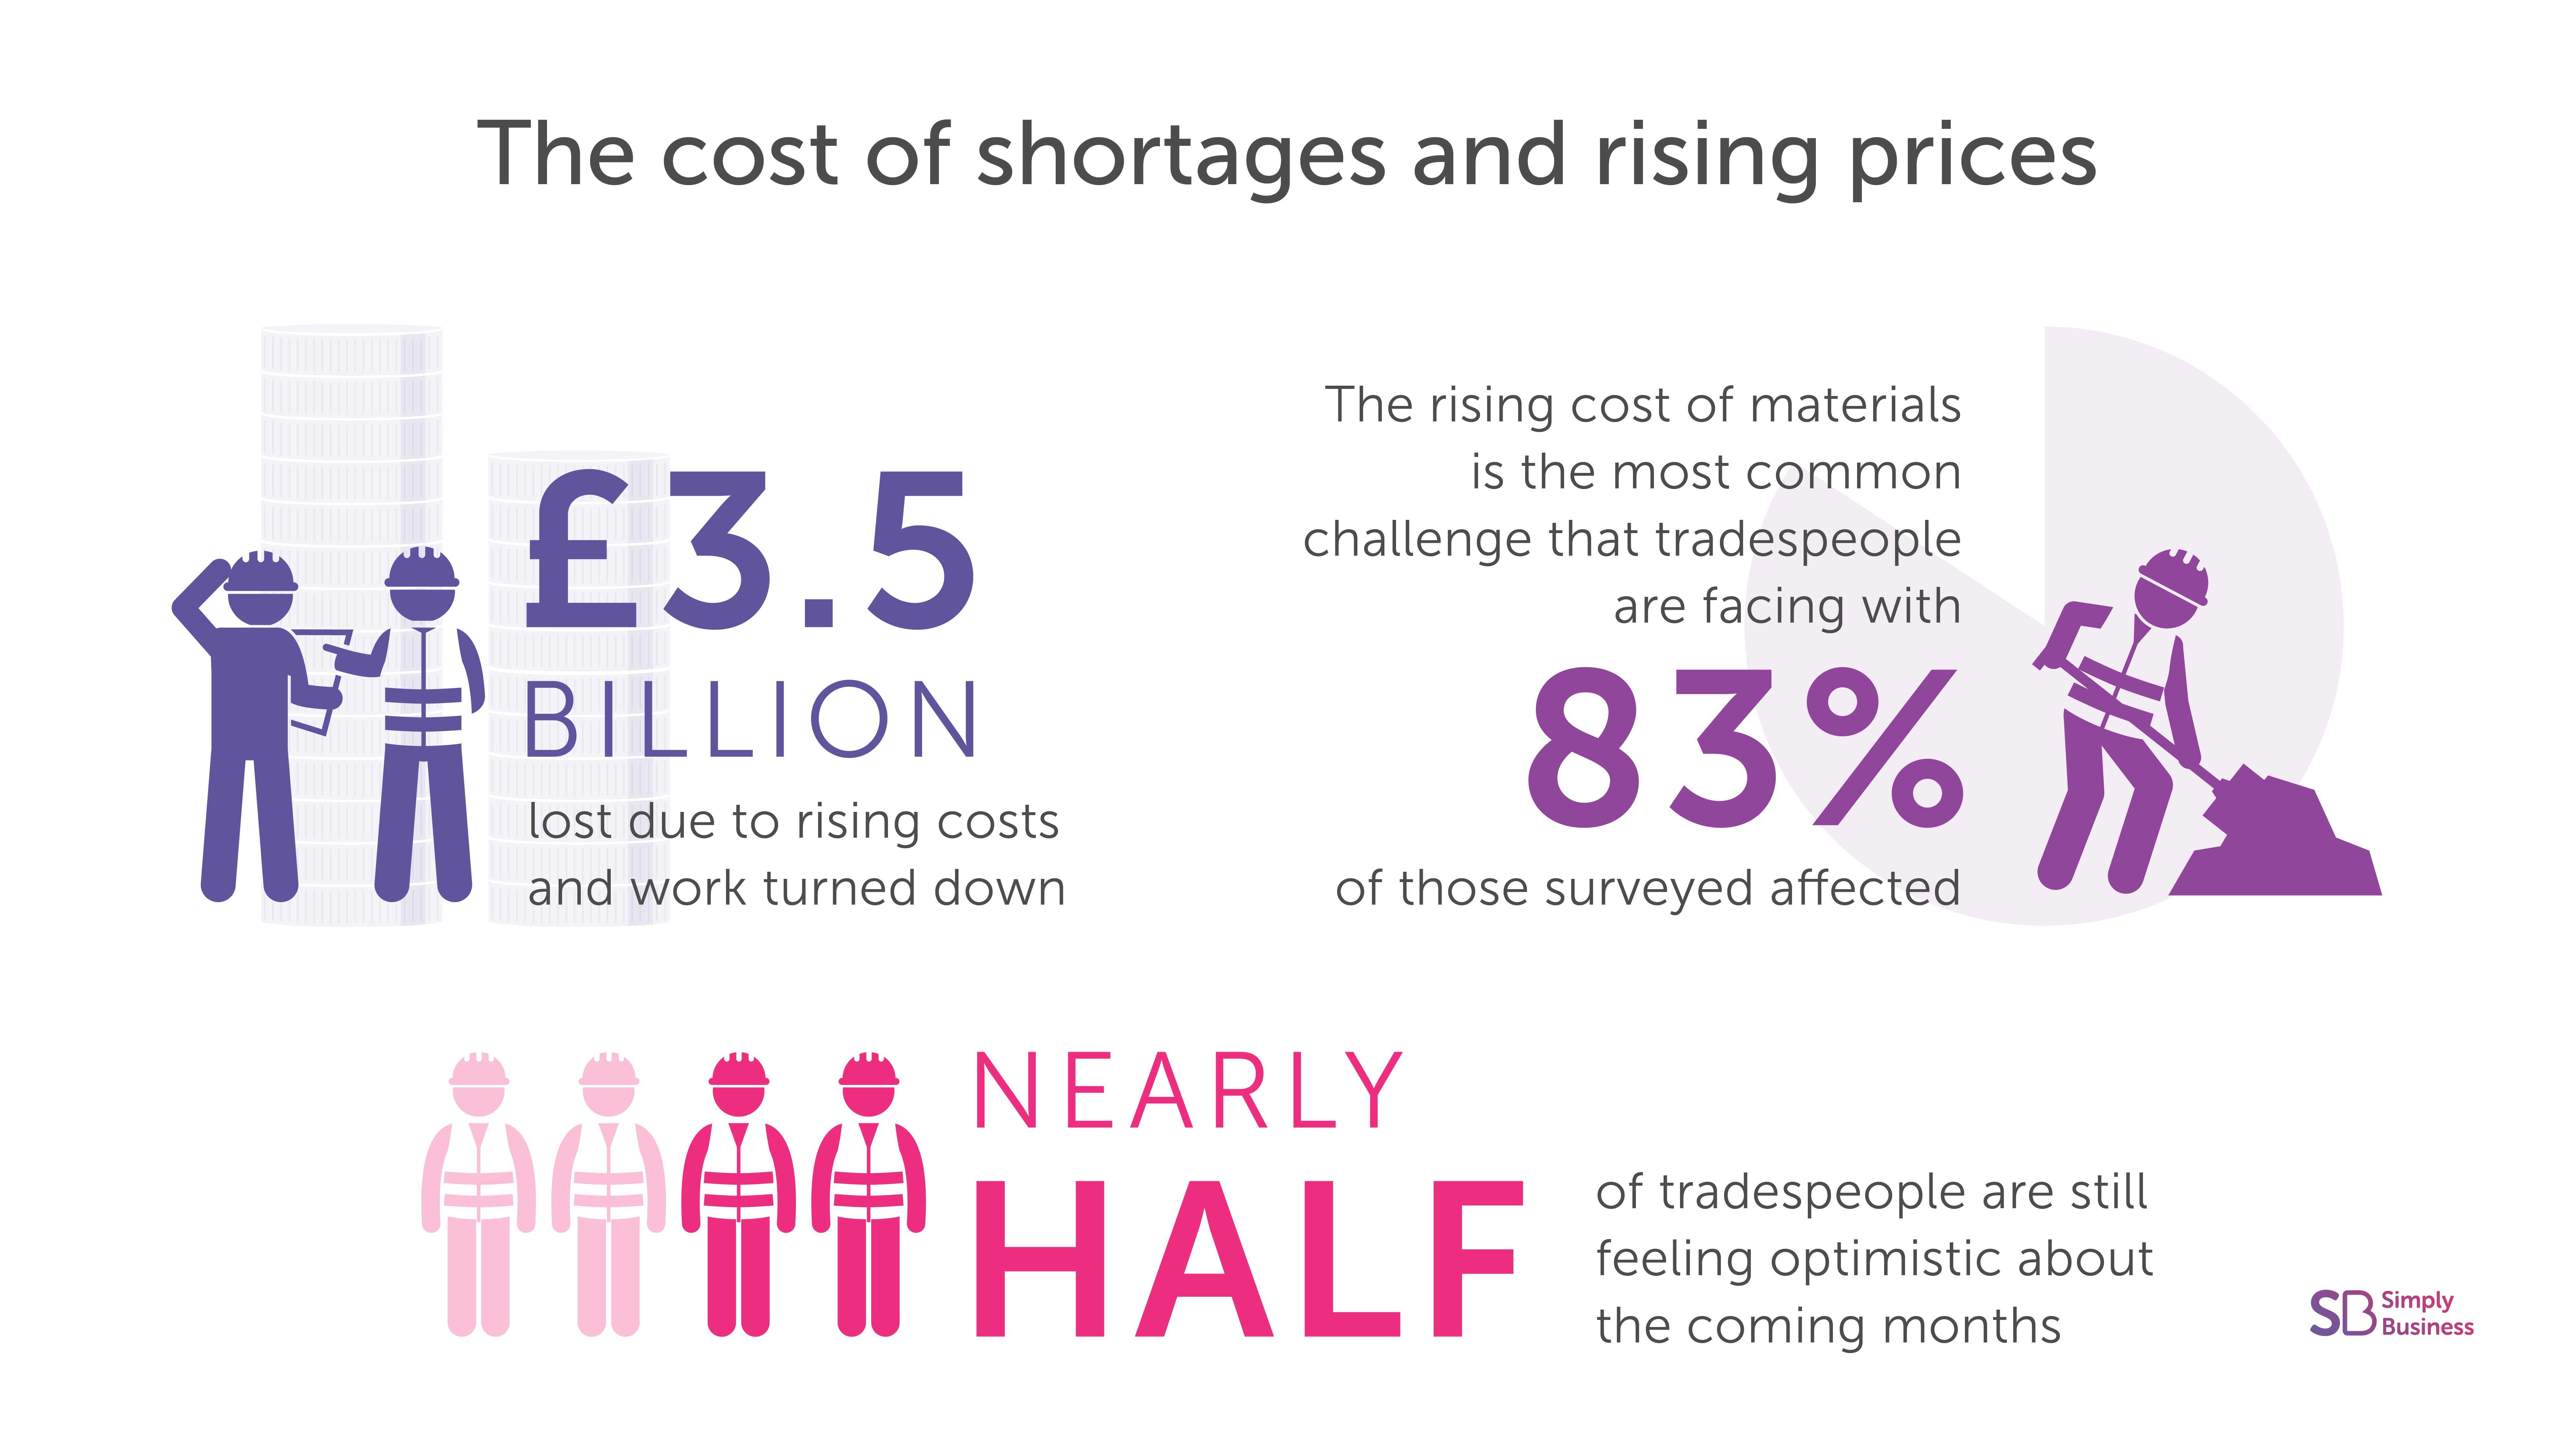 Tradespeople have lost £3.5 billion due to rising costs and work turned down